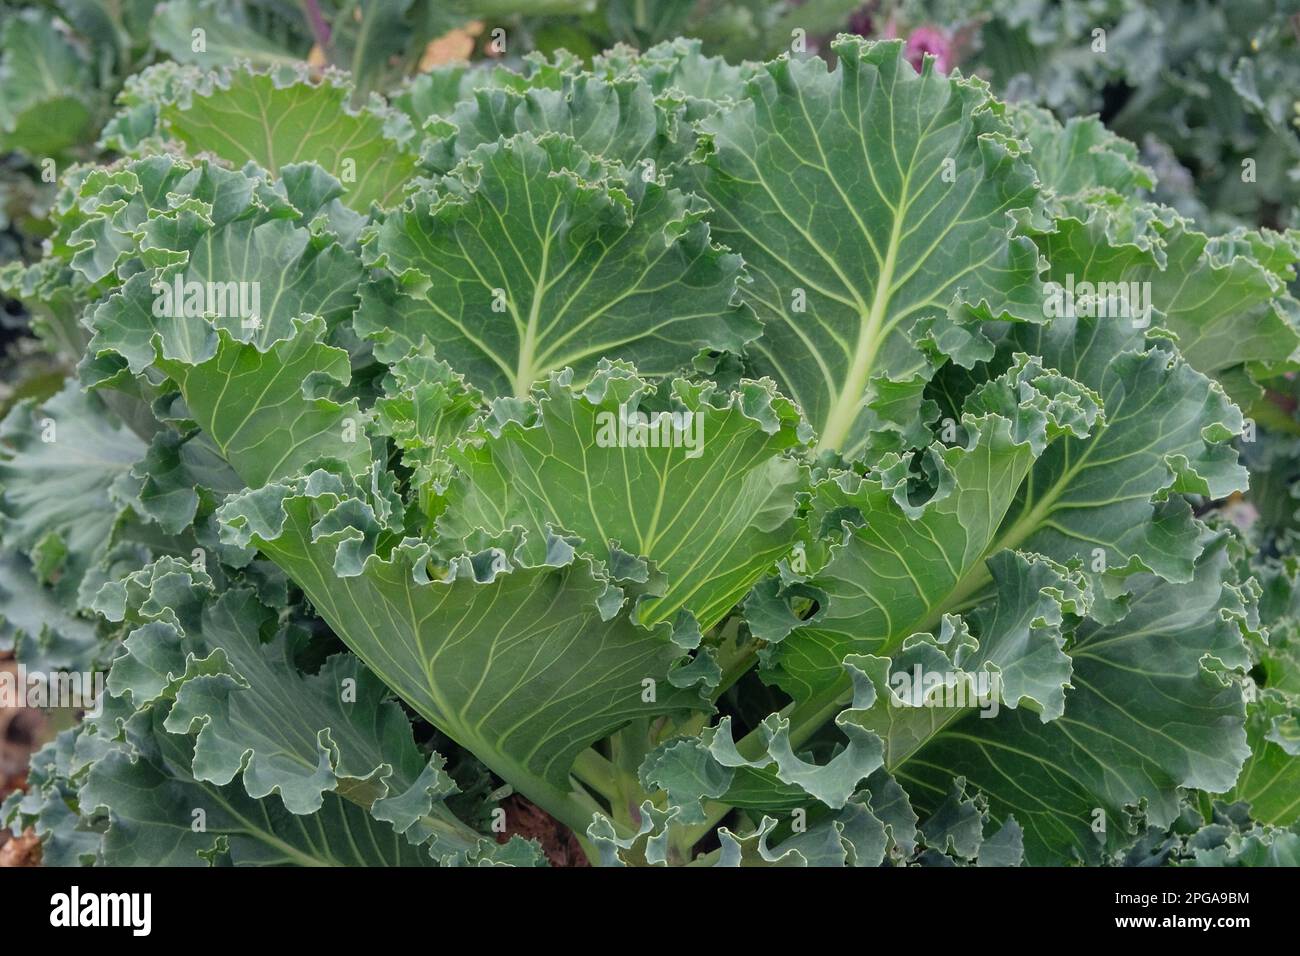 Kale salad growing in the rustic garden. Kale leaf in farming and harvesting. Growing vegetables at home. Closeup. Stock Photo